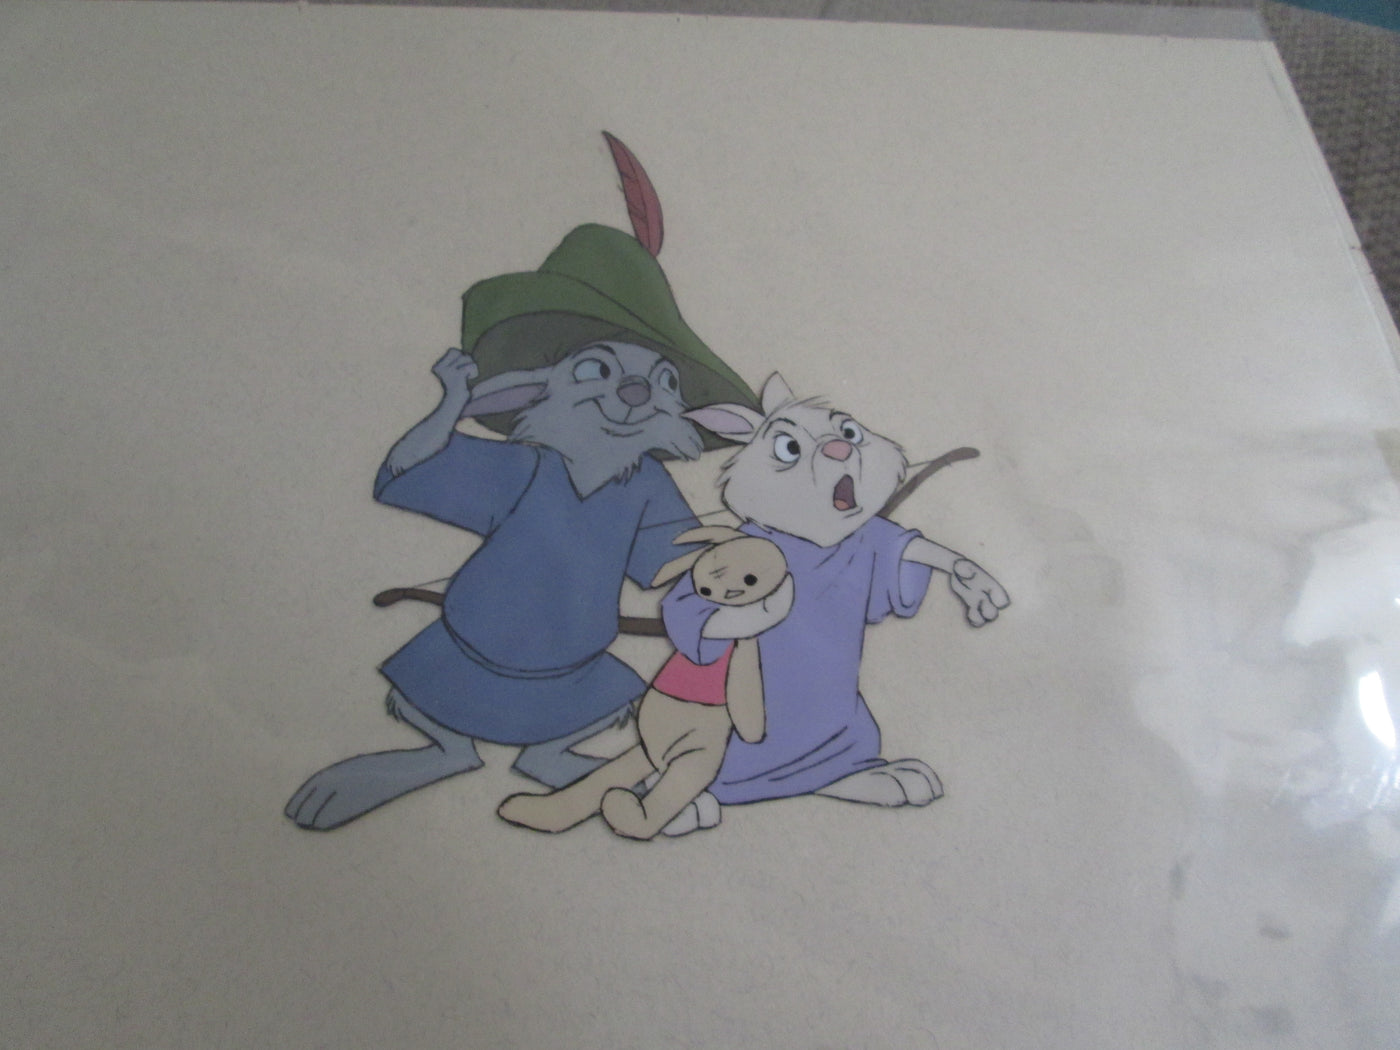 Original Disney Production Cel from Robin Hood featuring Skippy and Tagalong